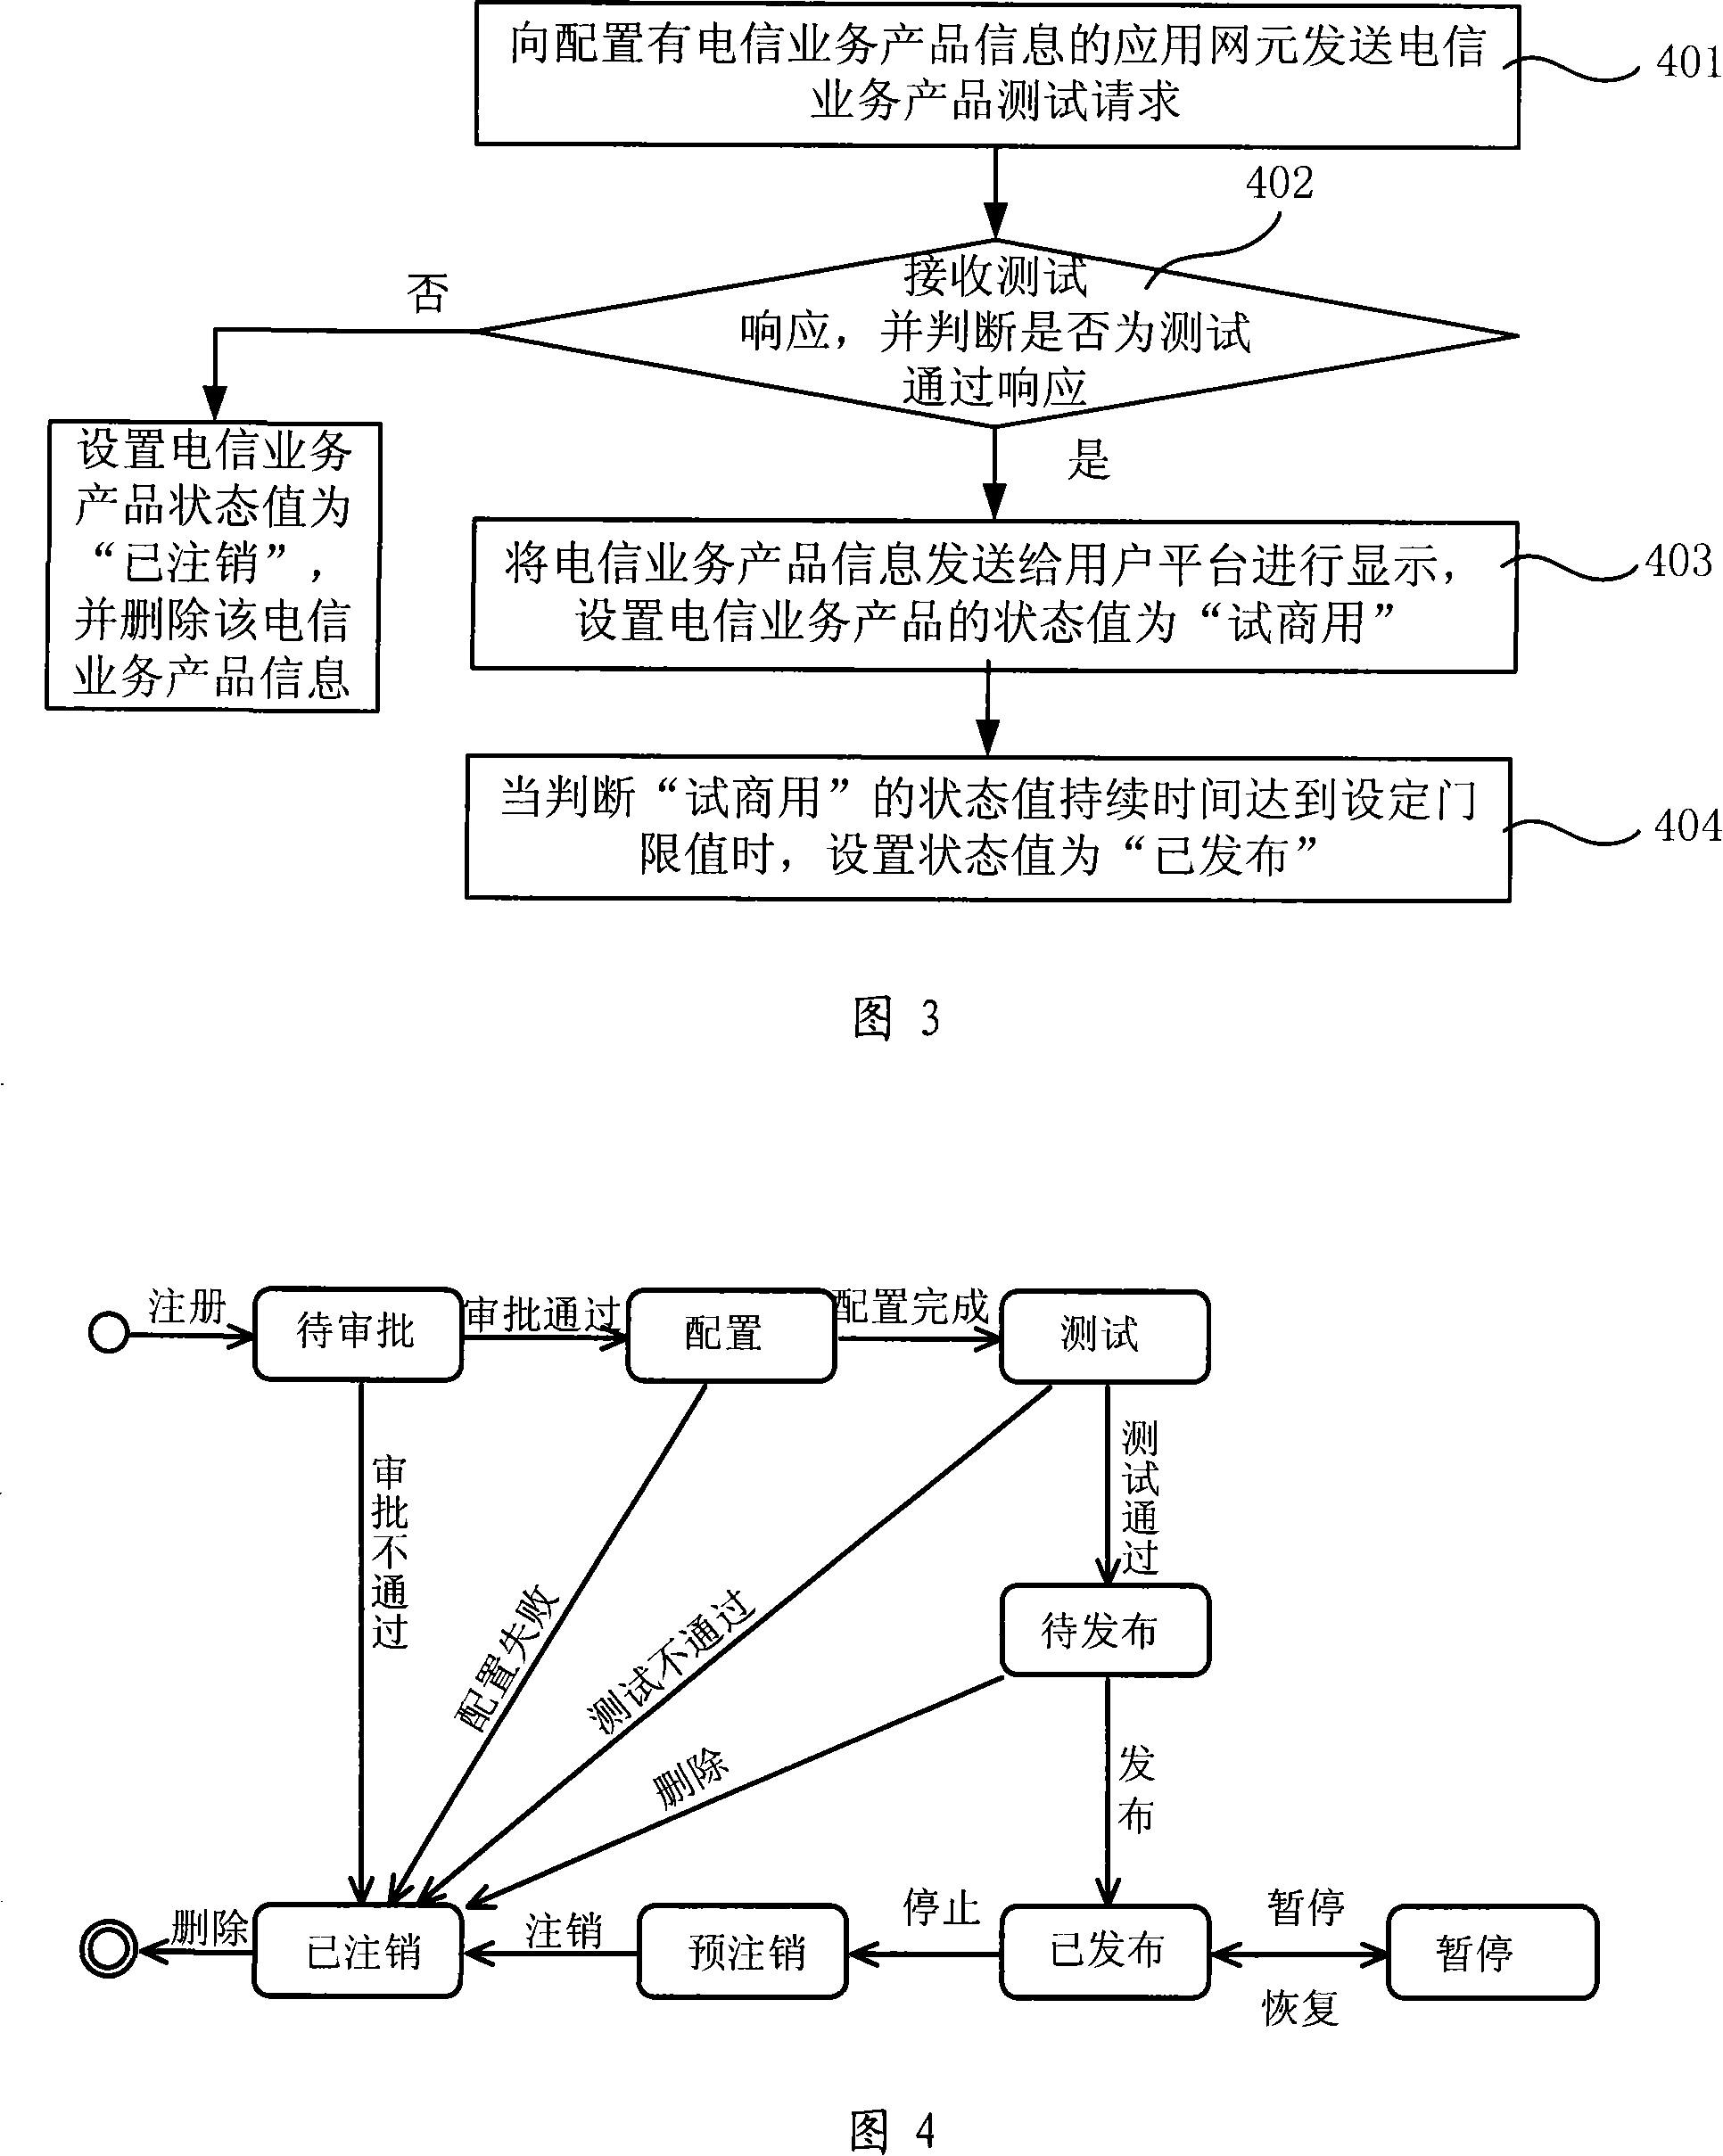 Method, device and system of telecommunication service information processing